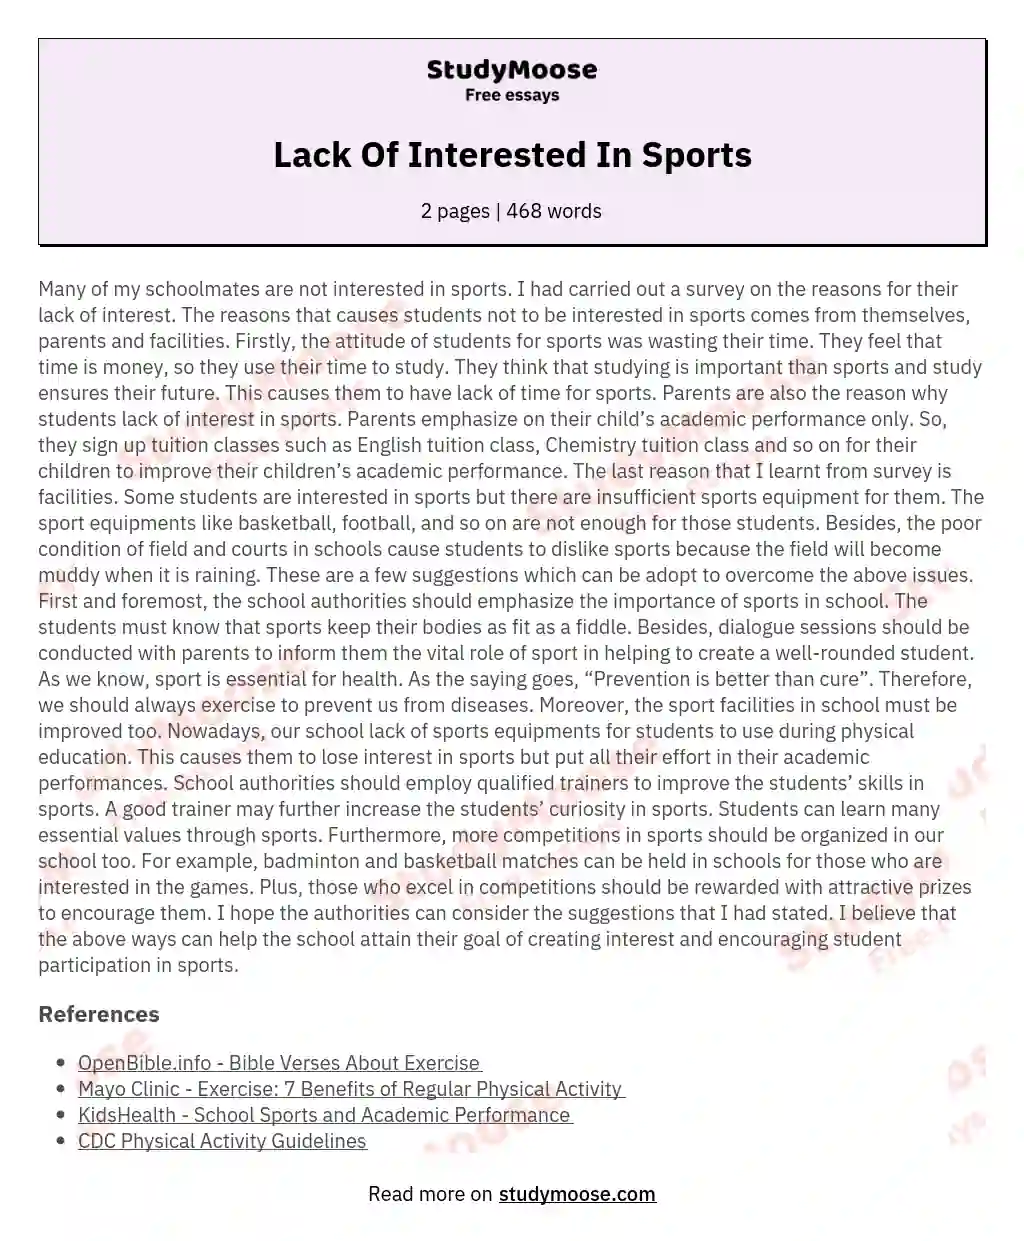 Lack Of Interested In Sports essay